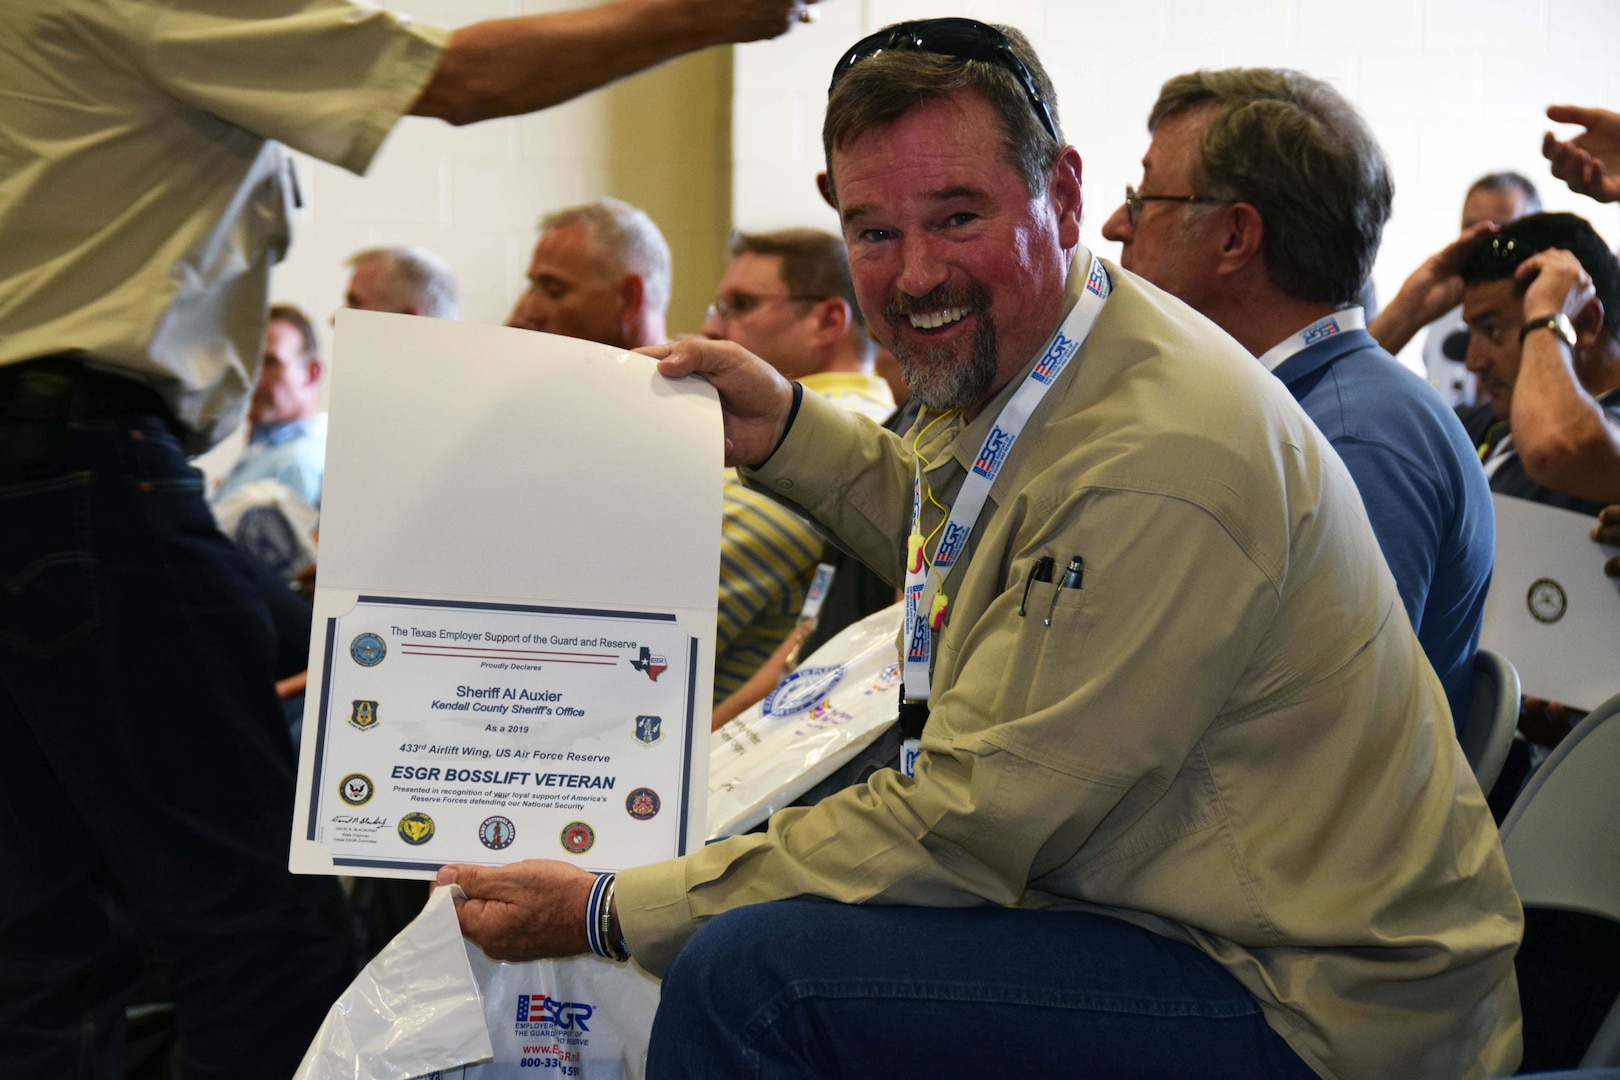 Kendall County Sheriff Al Auxier shows off a certificate presented to him after completing the Employer Support of Guard and Reserve Bosslift event at Joint Base San Antonio-Lackland Aug. 3. The event is an opportunity for supervisors of 433rd Airlift Wing Reserve Citizen Airmen to see the mission of their military employees.